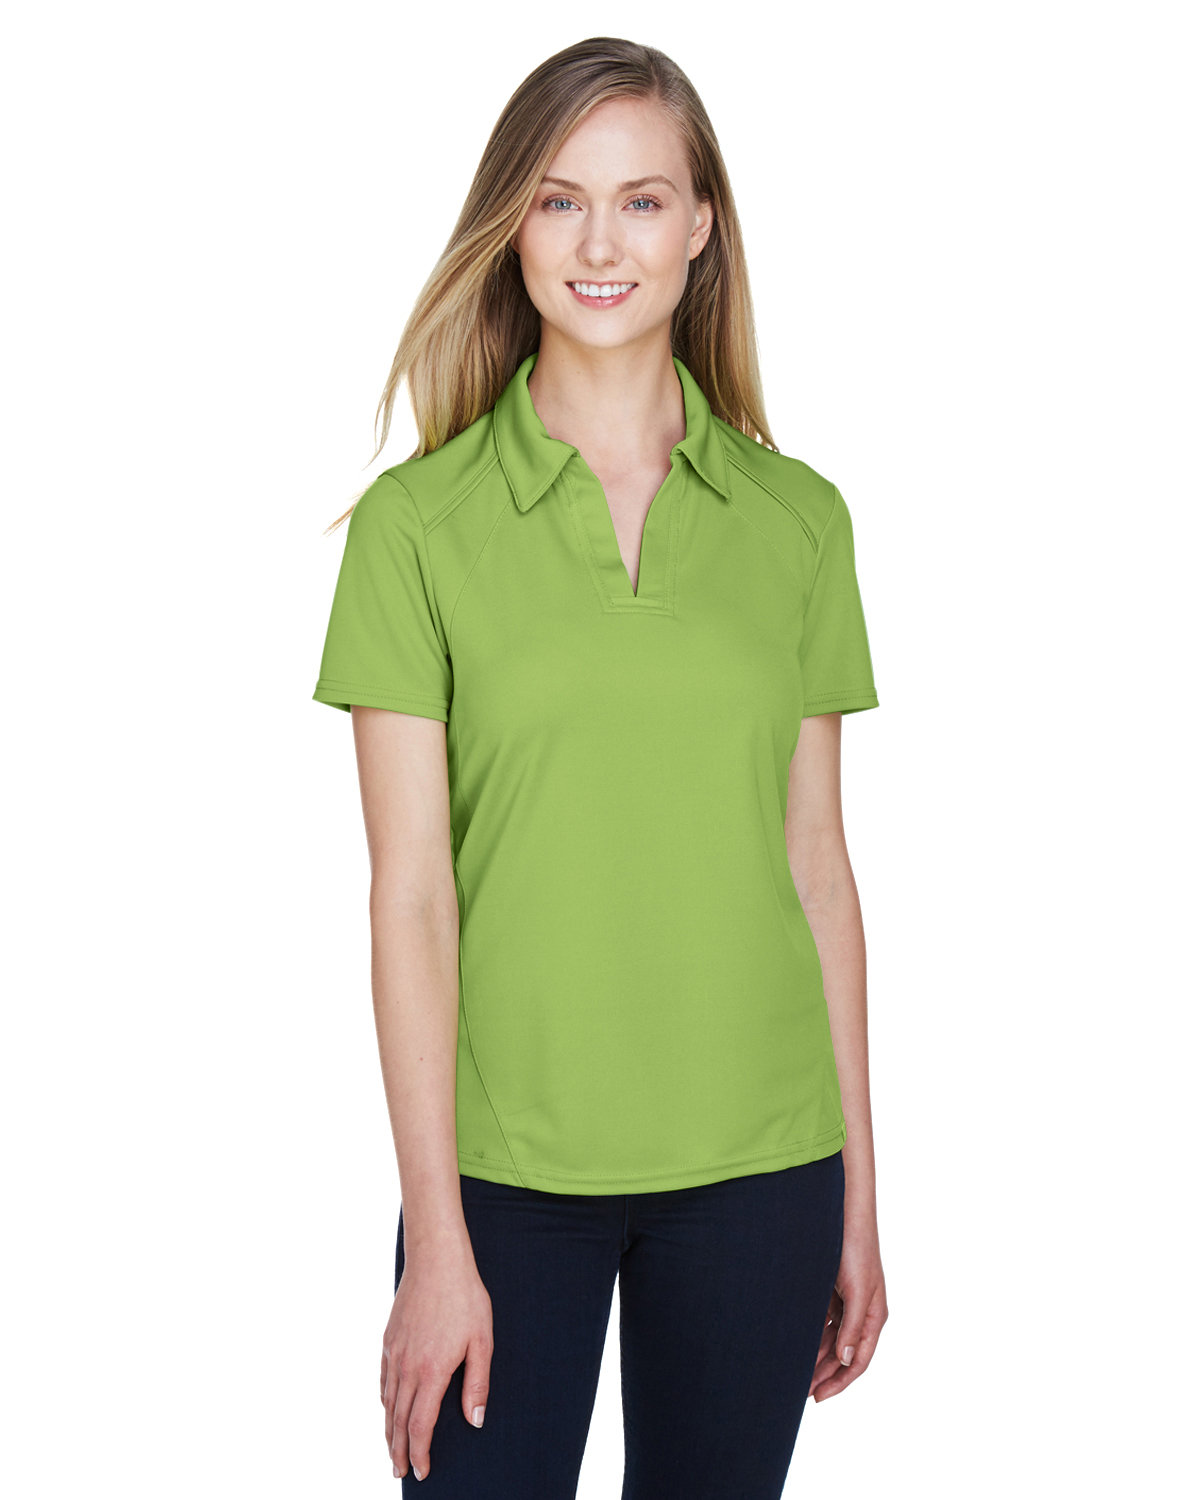 North End Ladies' Recycled Polyester Performance Piqué Polo CACTUS GREEN 